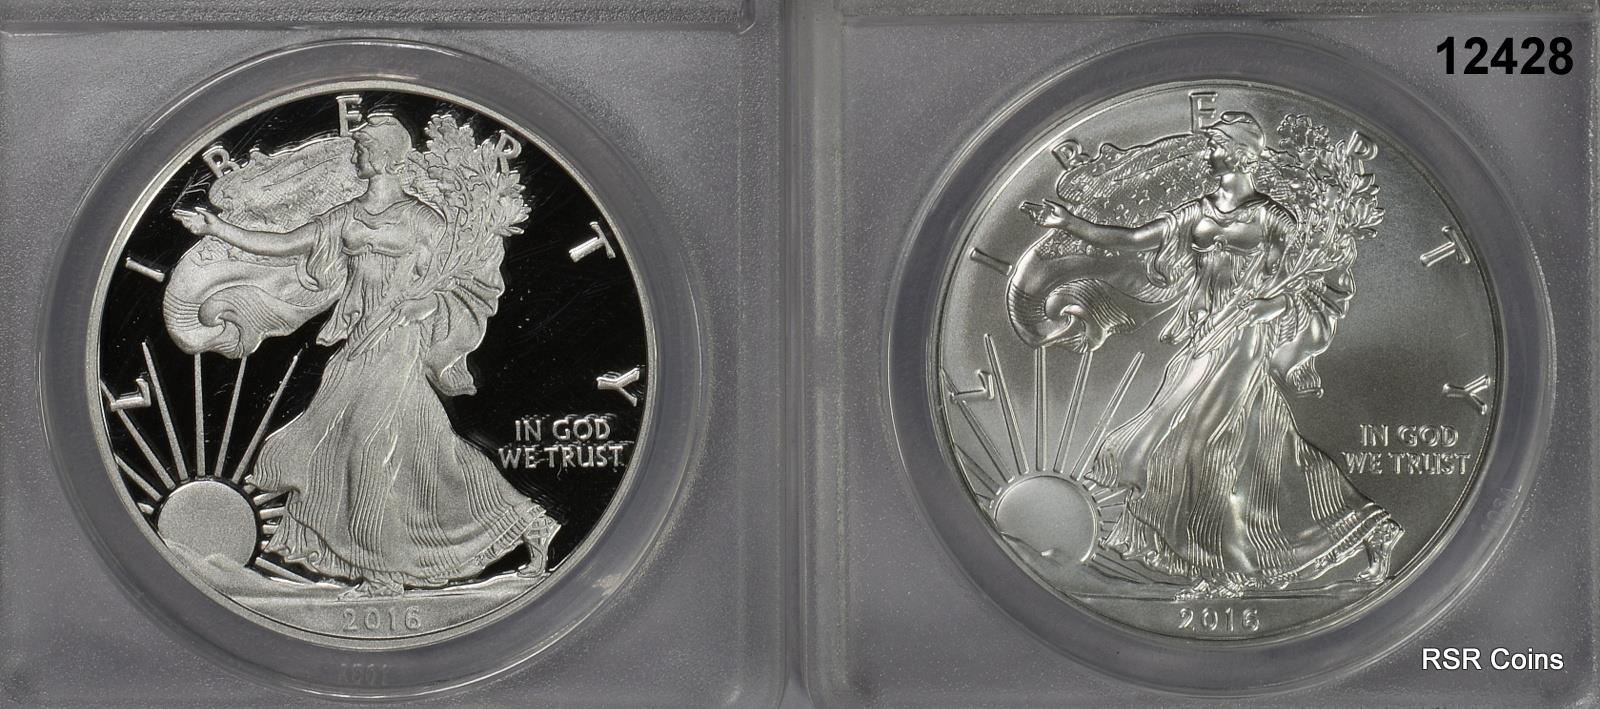 2016 W 30TH ANN SILVER EAGLE 2 COIN SET ANACS CERTIFIED LETTERED EDGE #12428